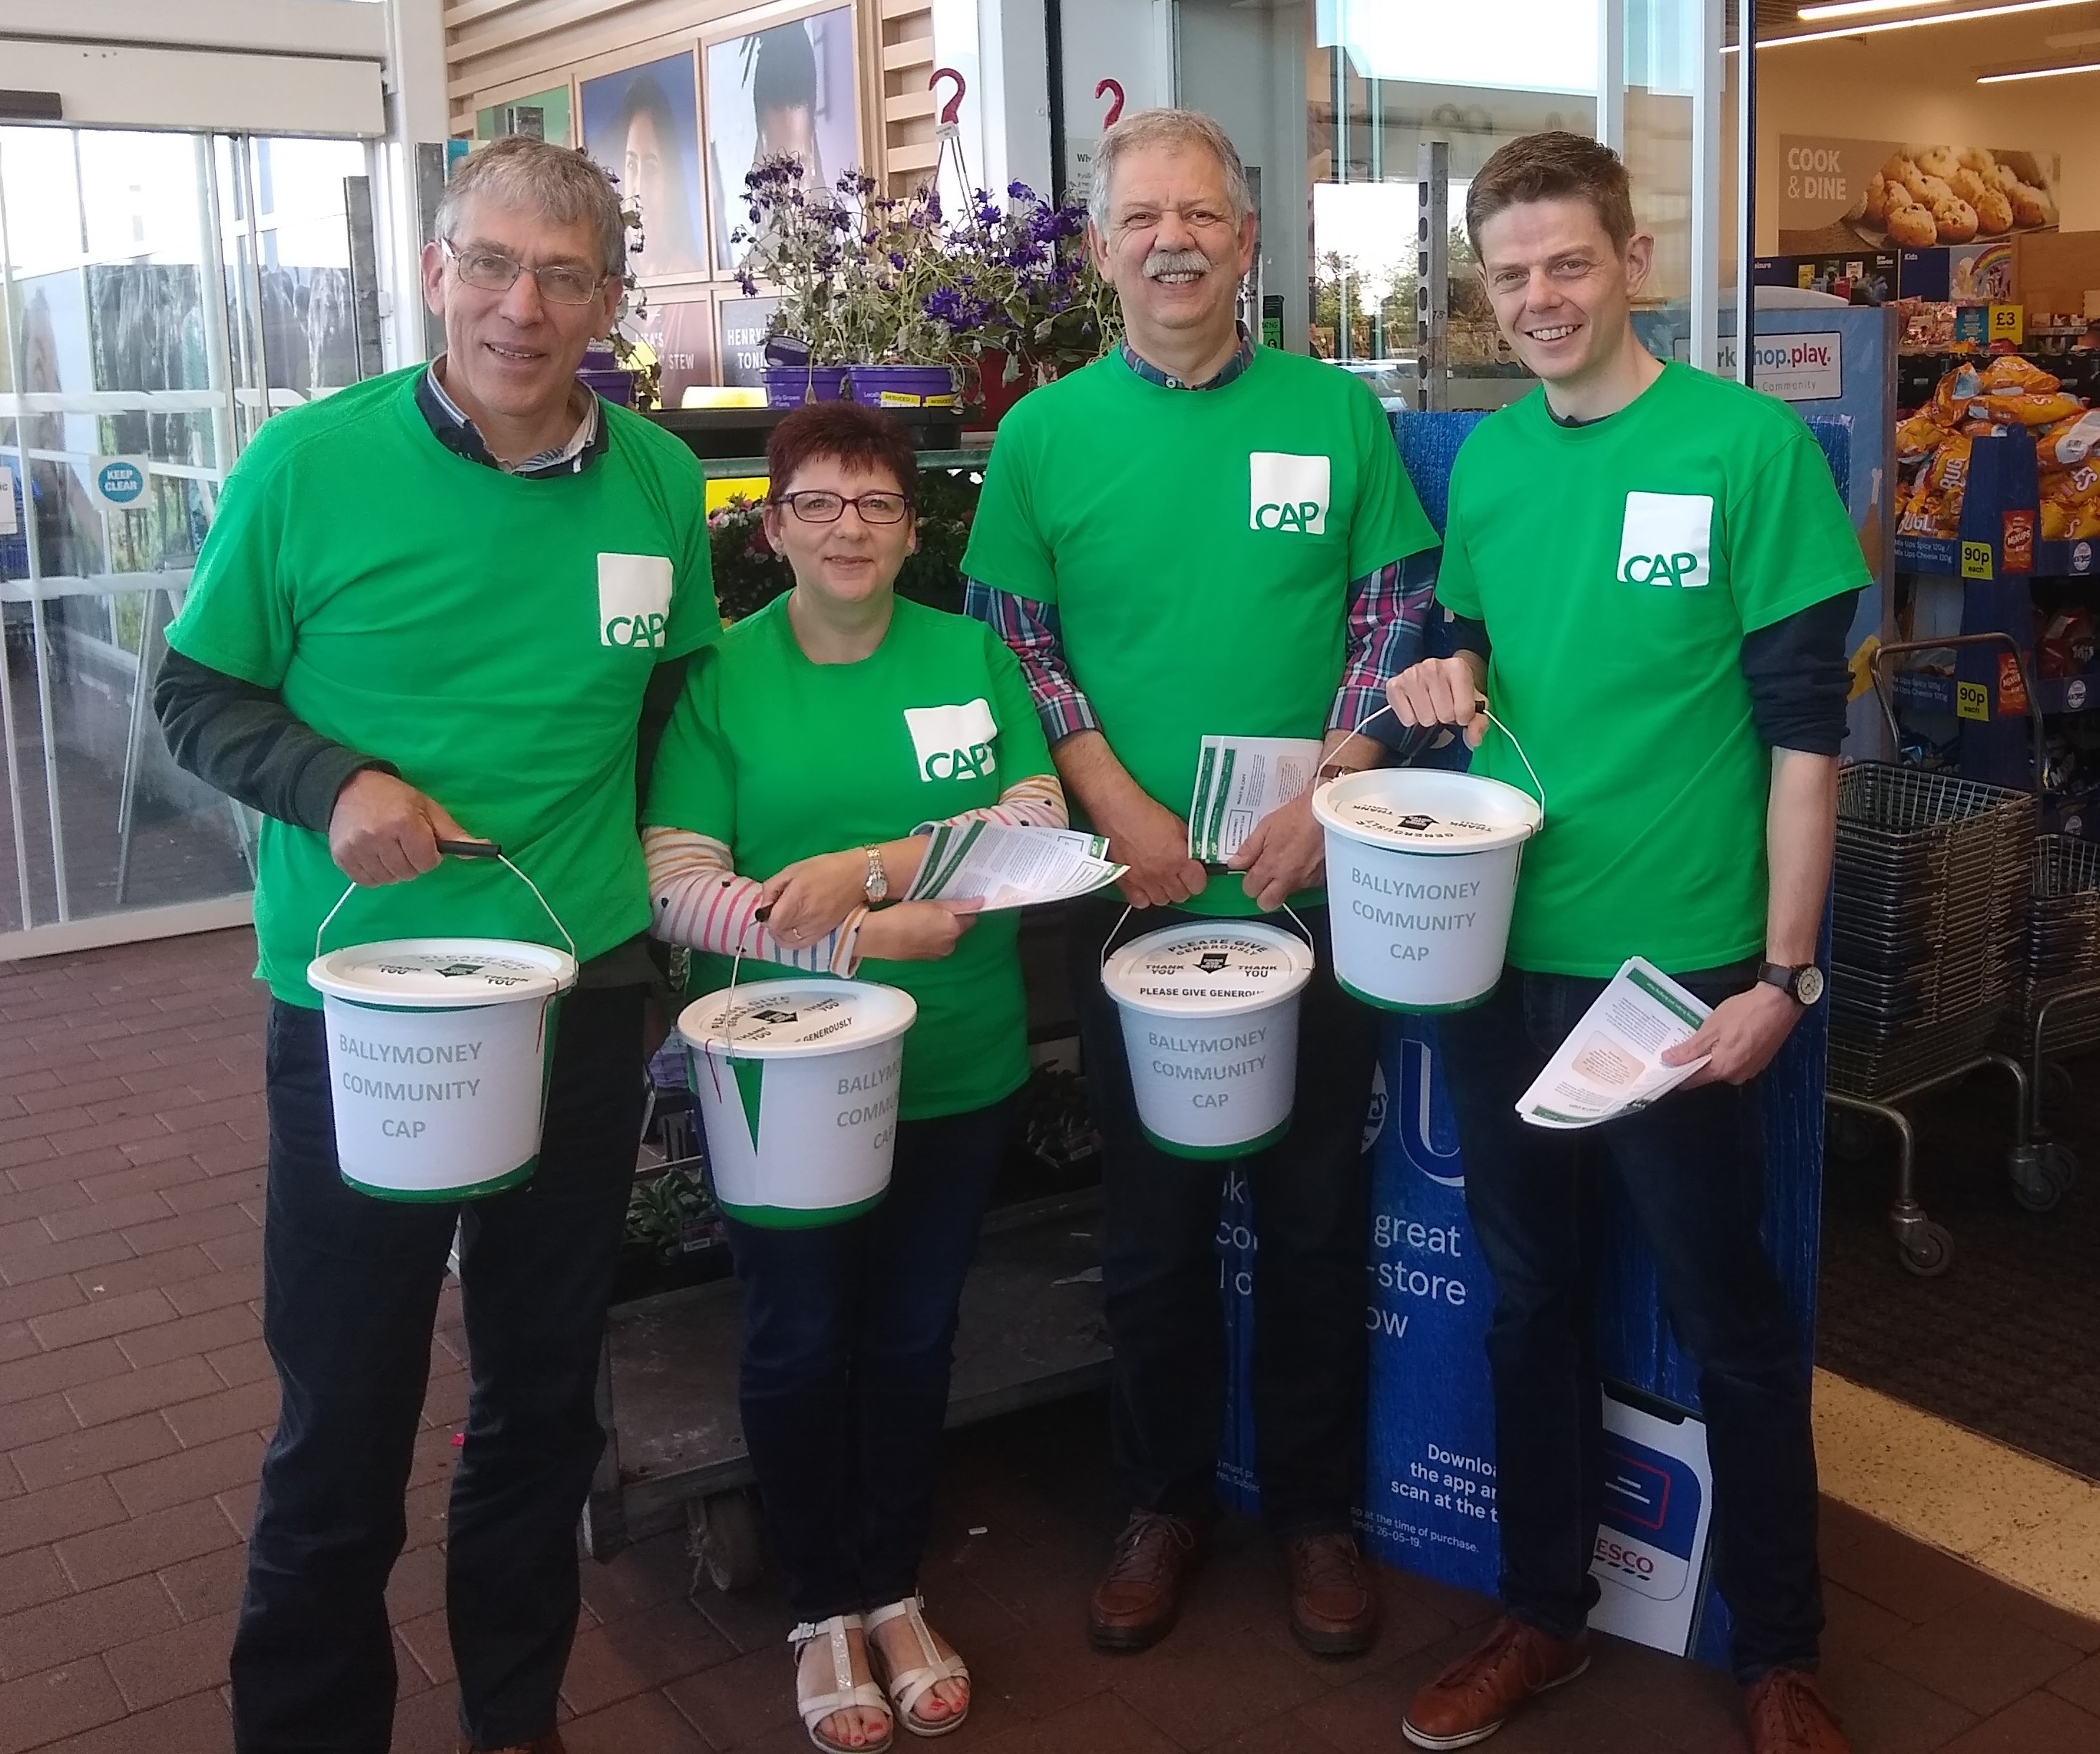 THOMAS TAGGART & SONS COLLECT FOR CAP BALLYMONEY